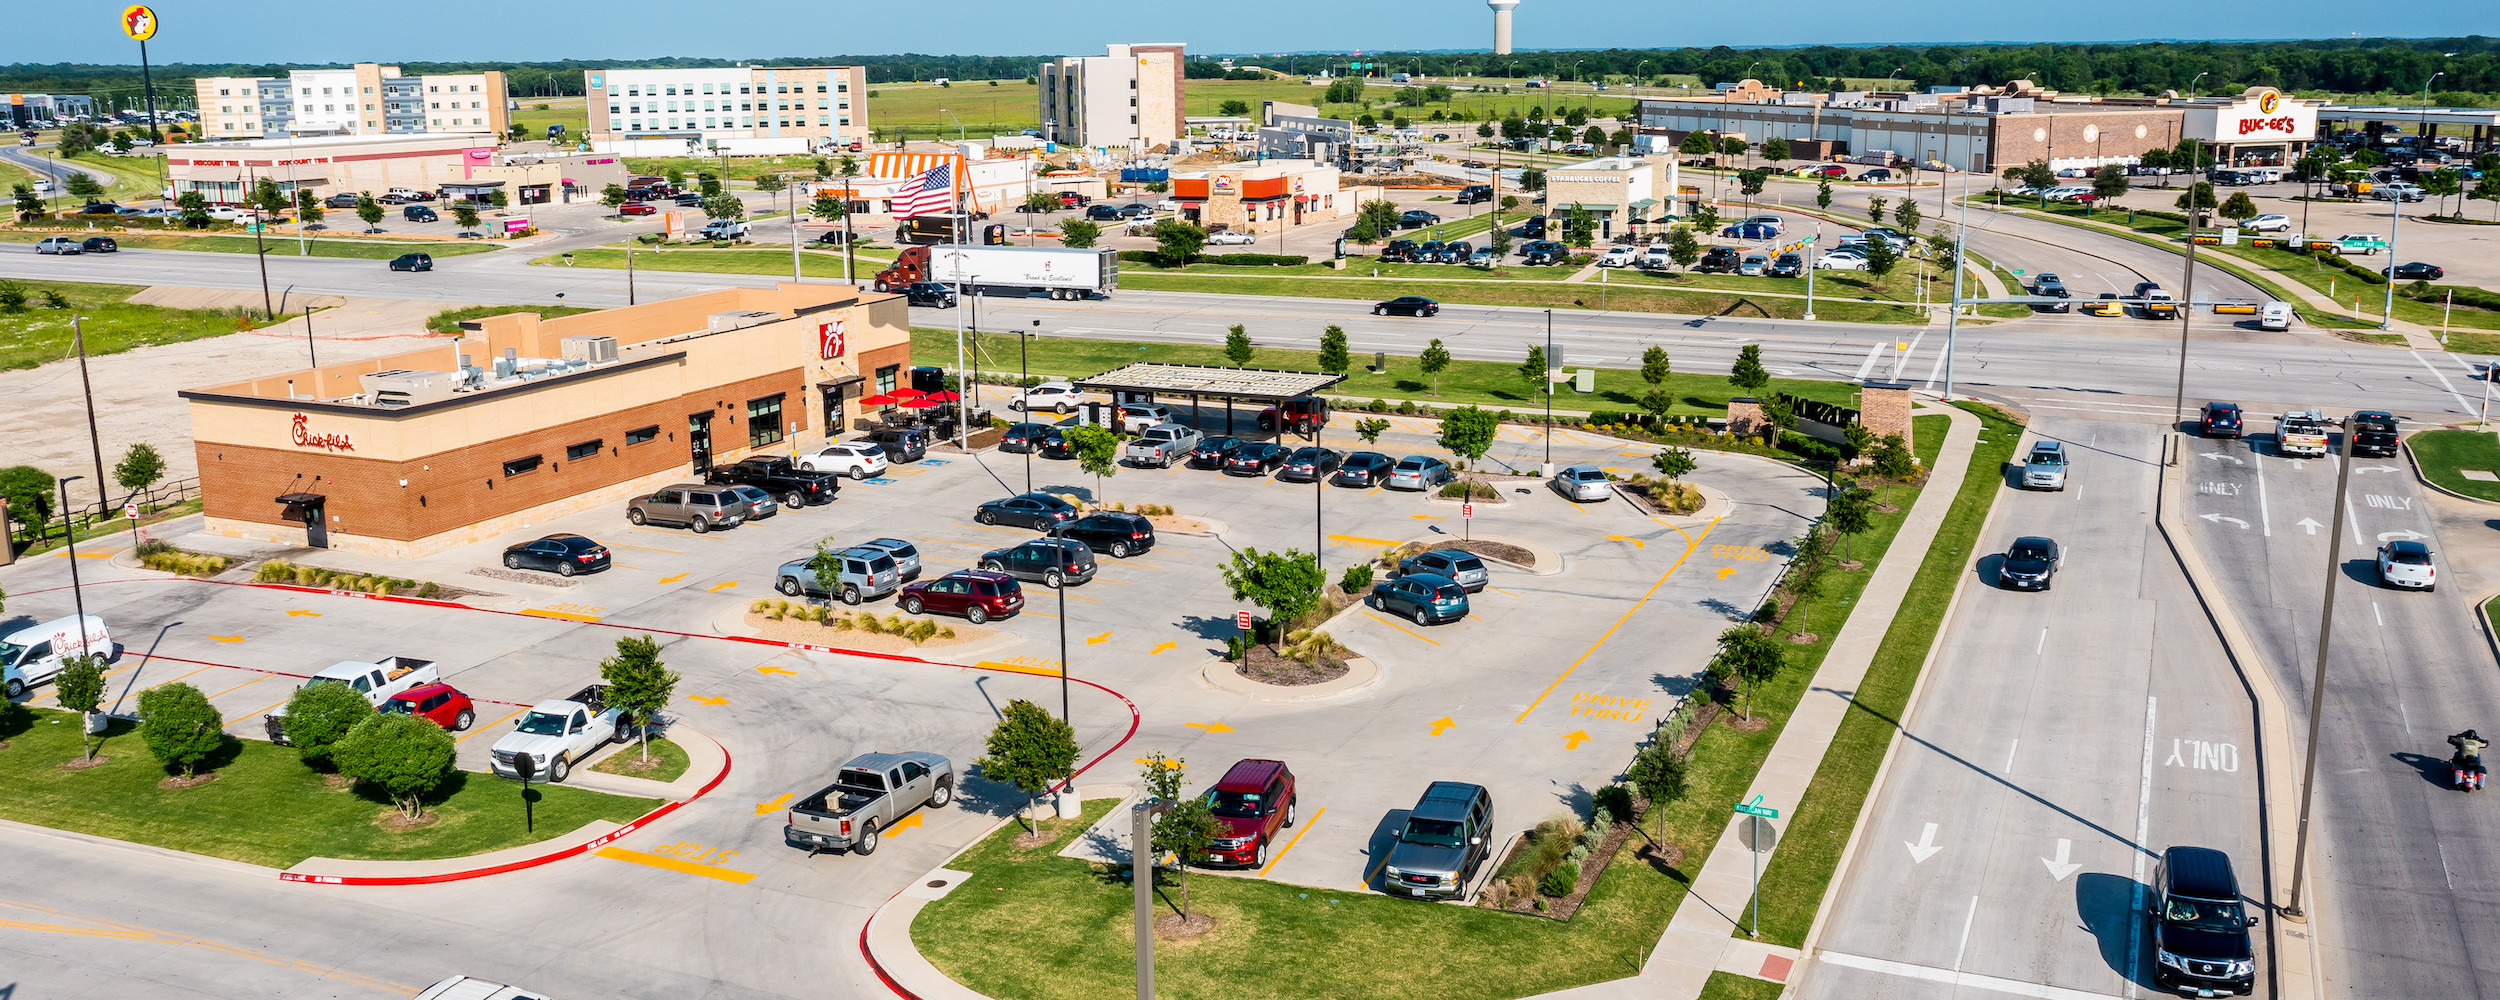 Aerial view of Chick-fil-A with Bucces in the background